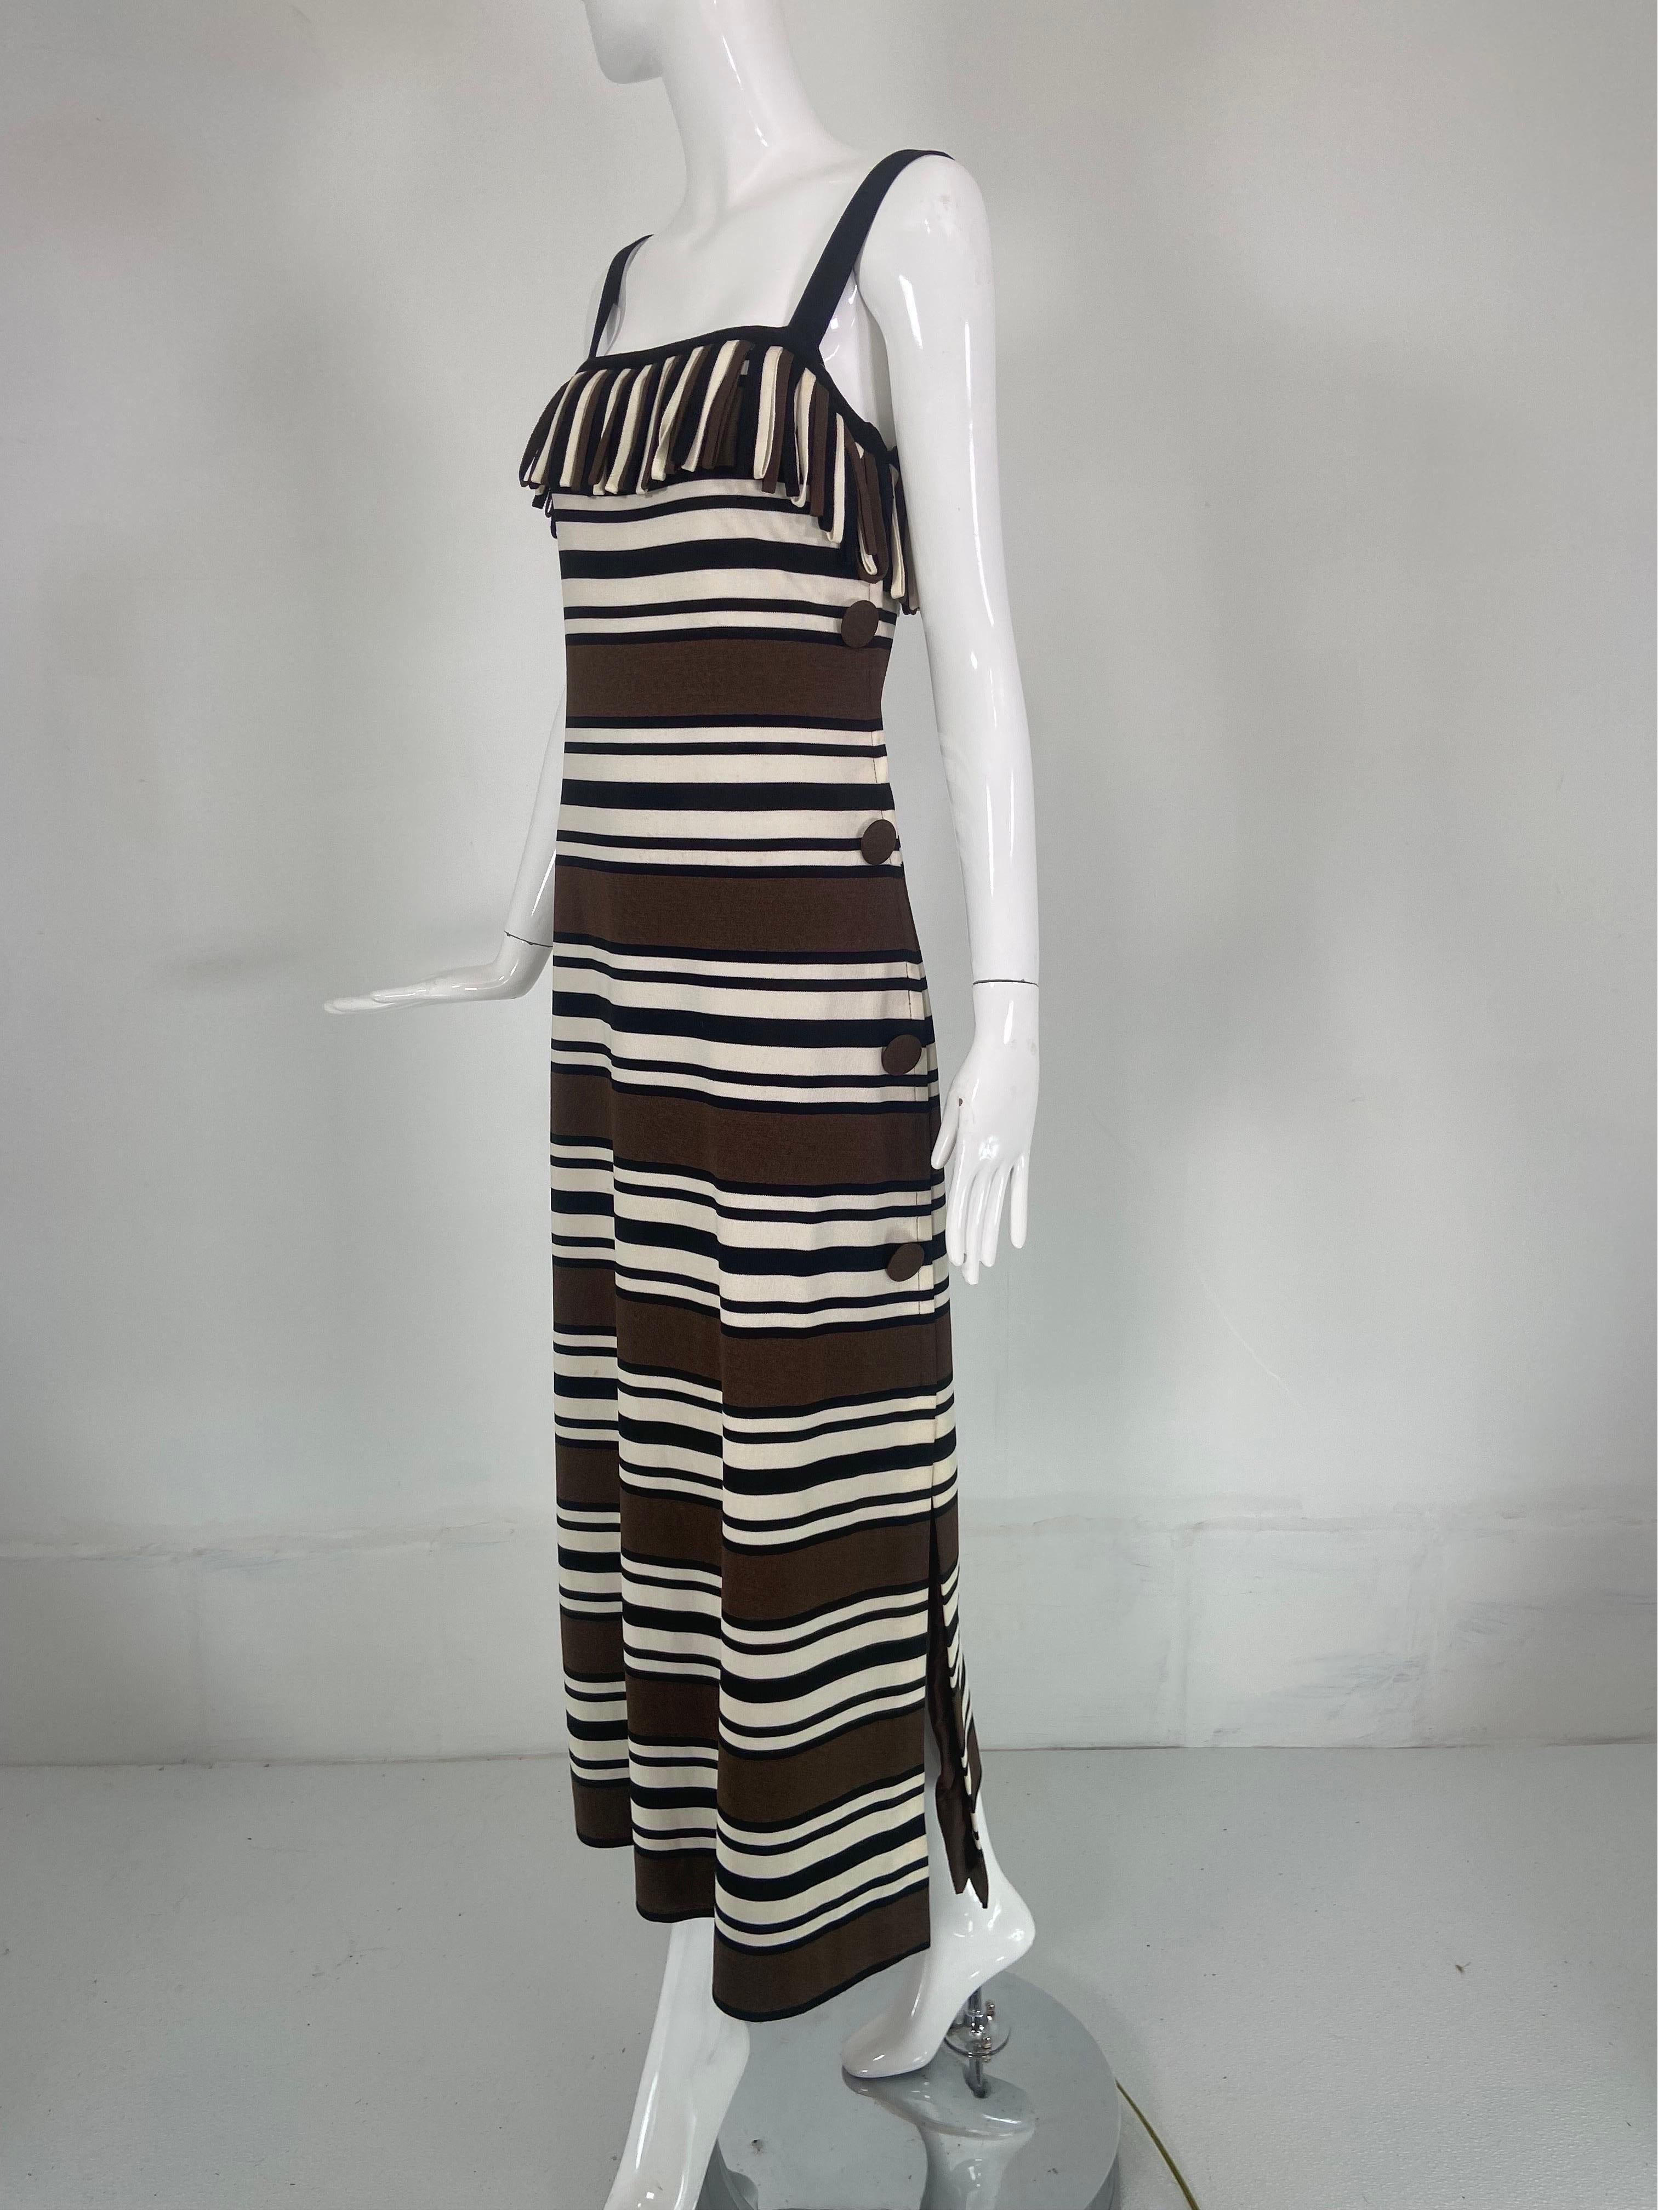 Pierre Balmain Les Tricots demi couture fringe jersey maxi dress & matching triangle shawl. An amusing dress in stripes of brown, black & white, from the 1970s it's eye catching! Bandeau bodice with narrow shoulder straps, the bodice top is trimmed